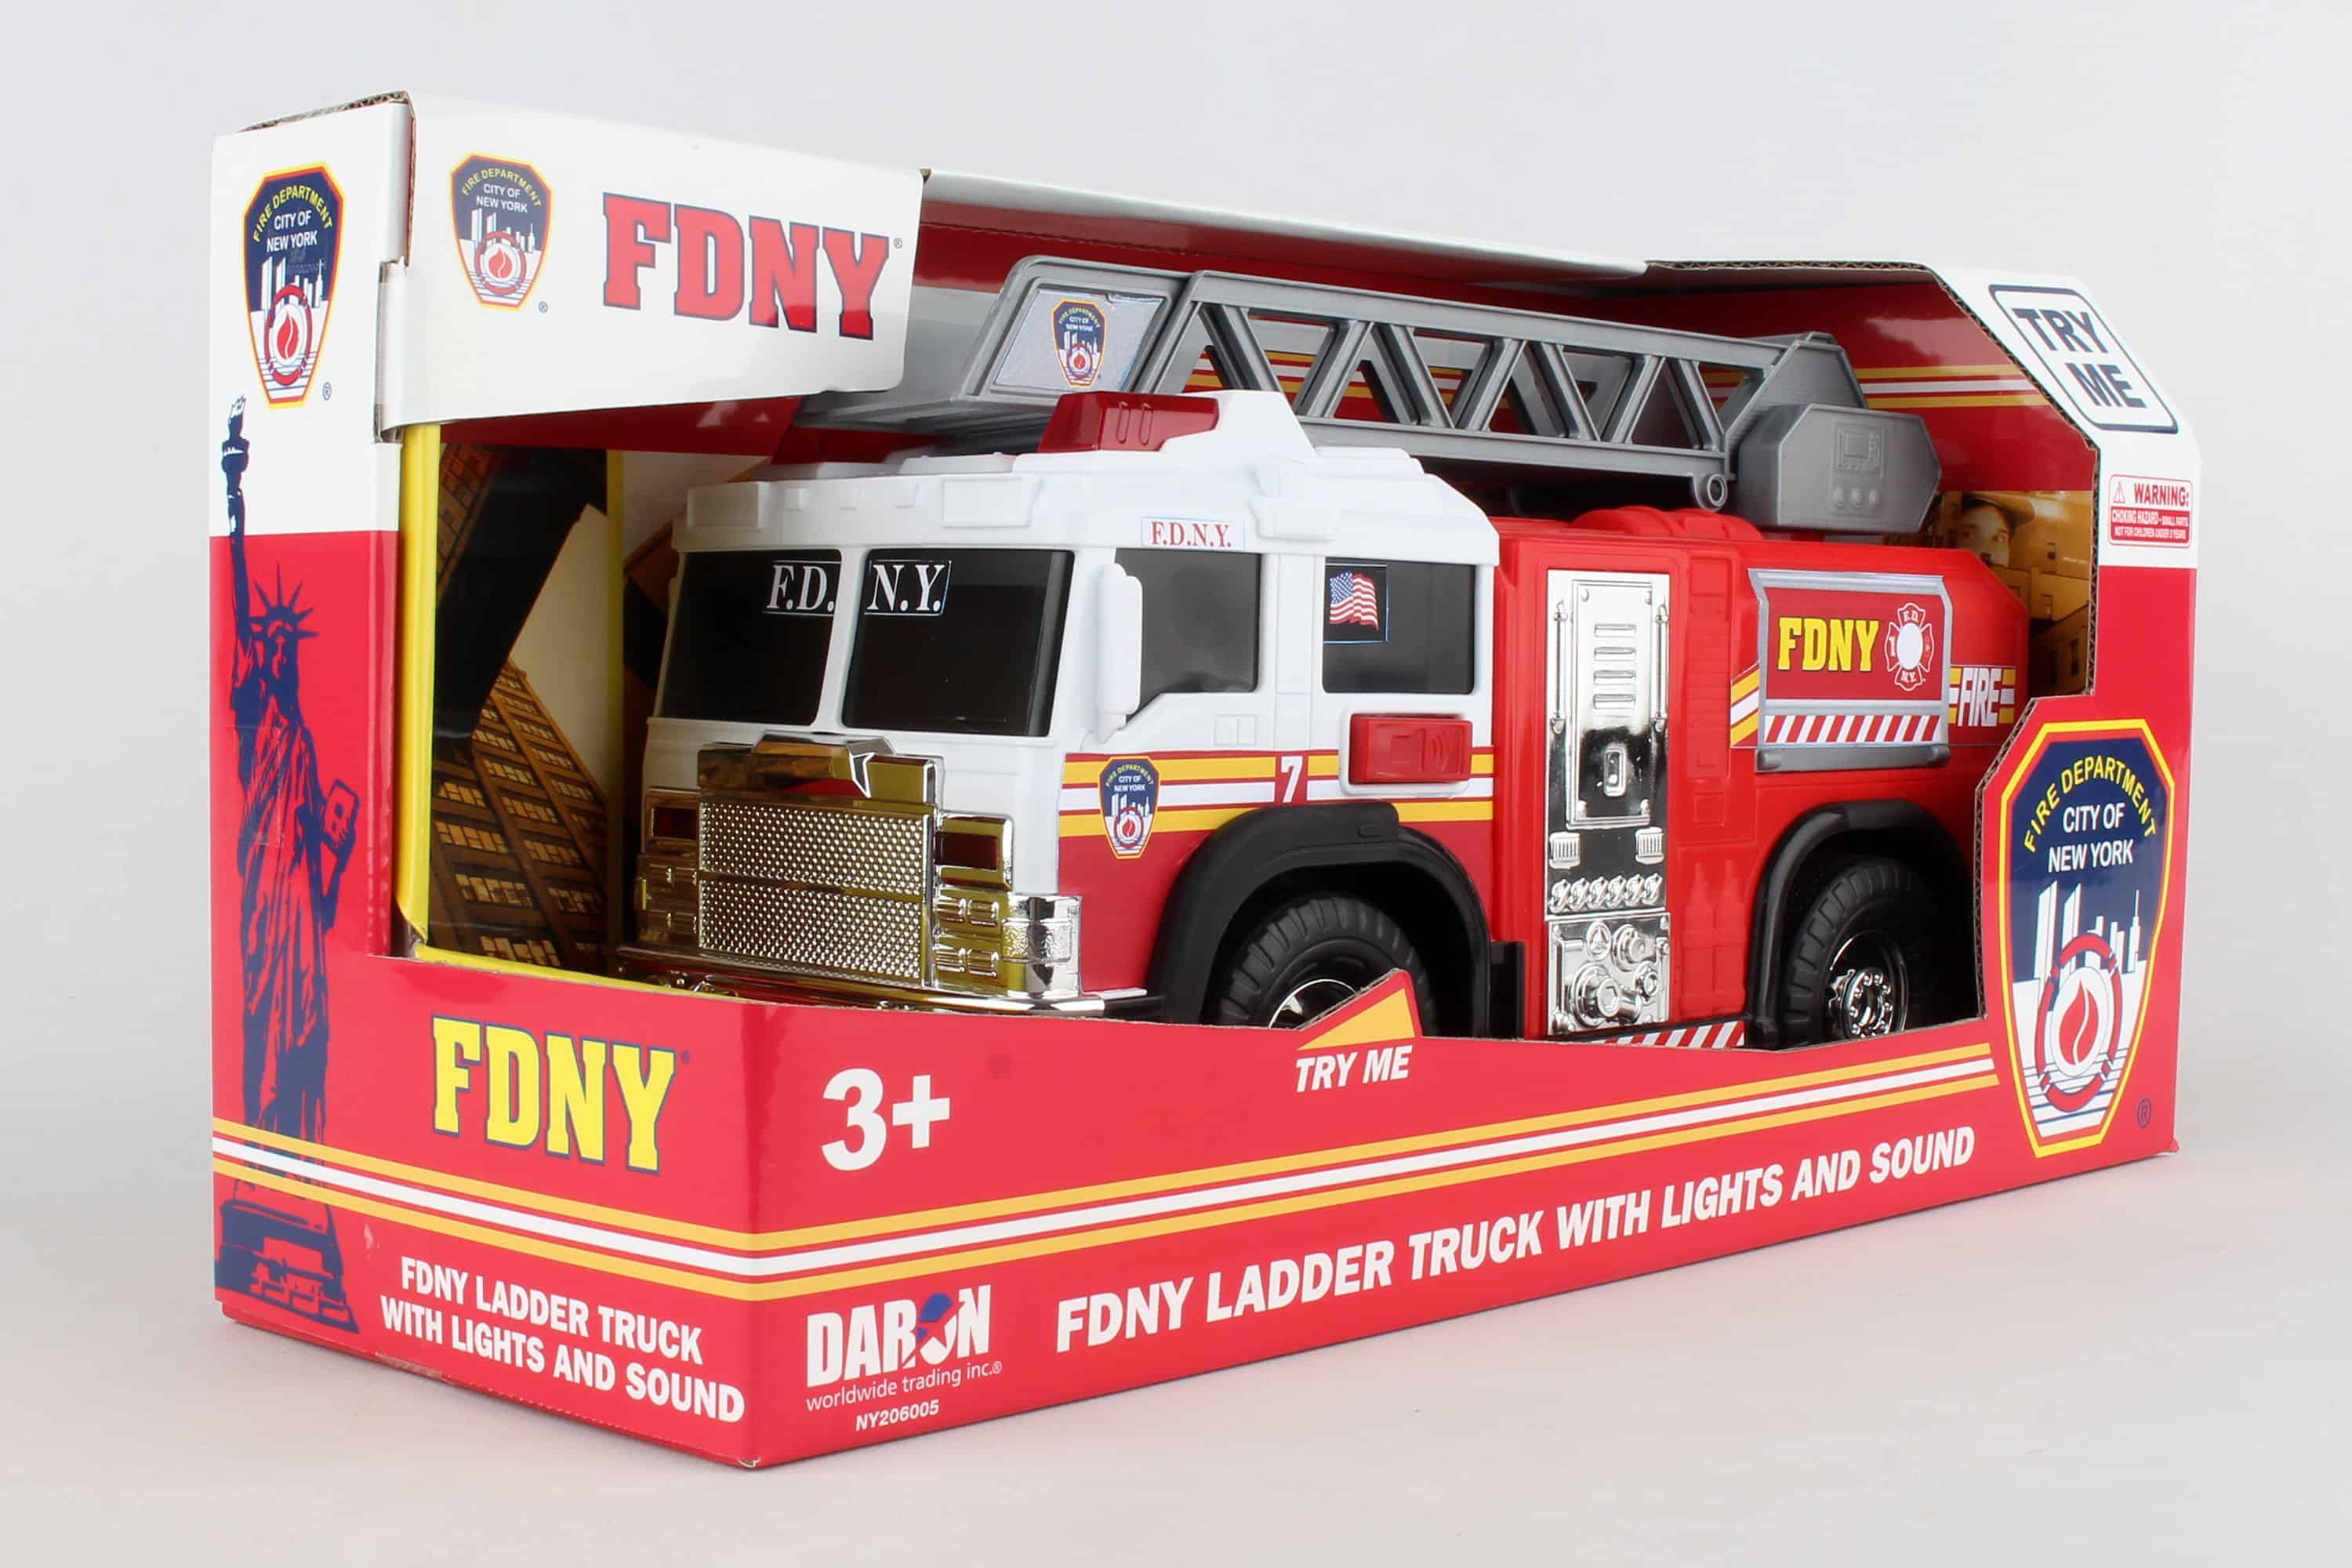 FDNY LADDER TRUCK WITH LIGHTS & SOUND